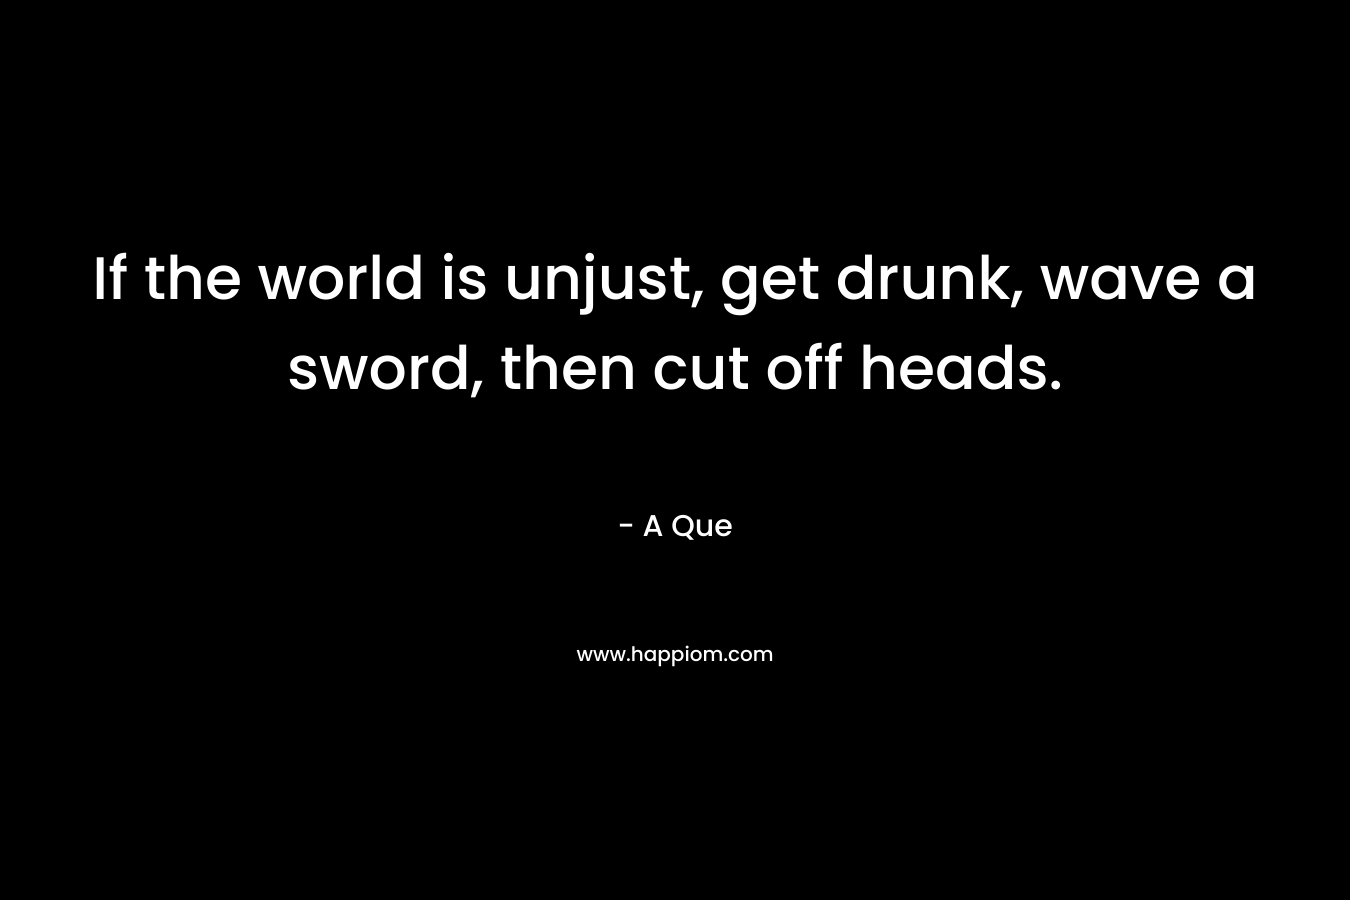 If the world is unjust, get drunk, wave a sword, then cut off heads. – A Que